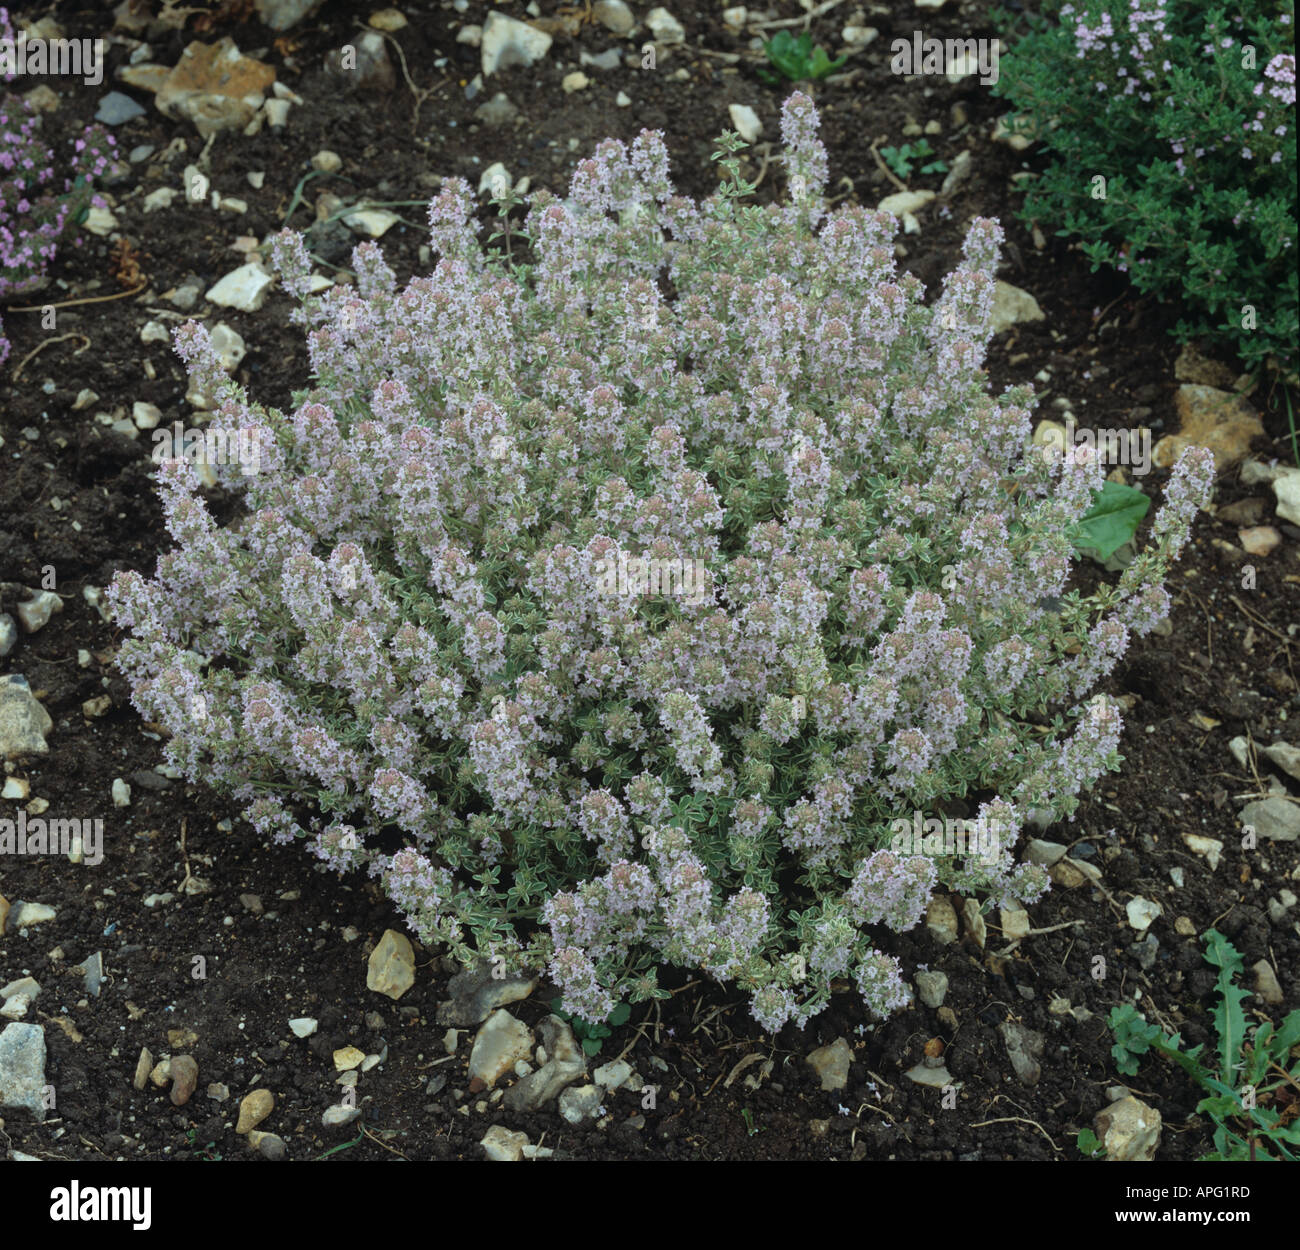 Thyme Silver Posy flowering plant Thymus sp Stock Photo